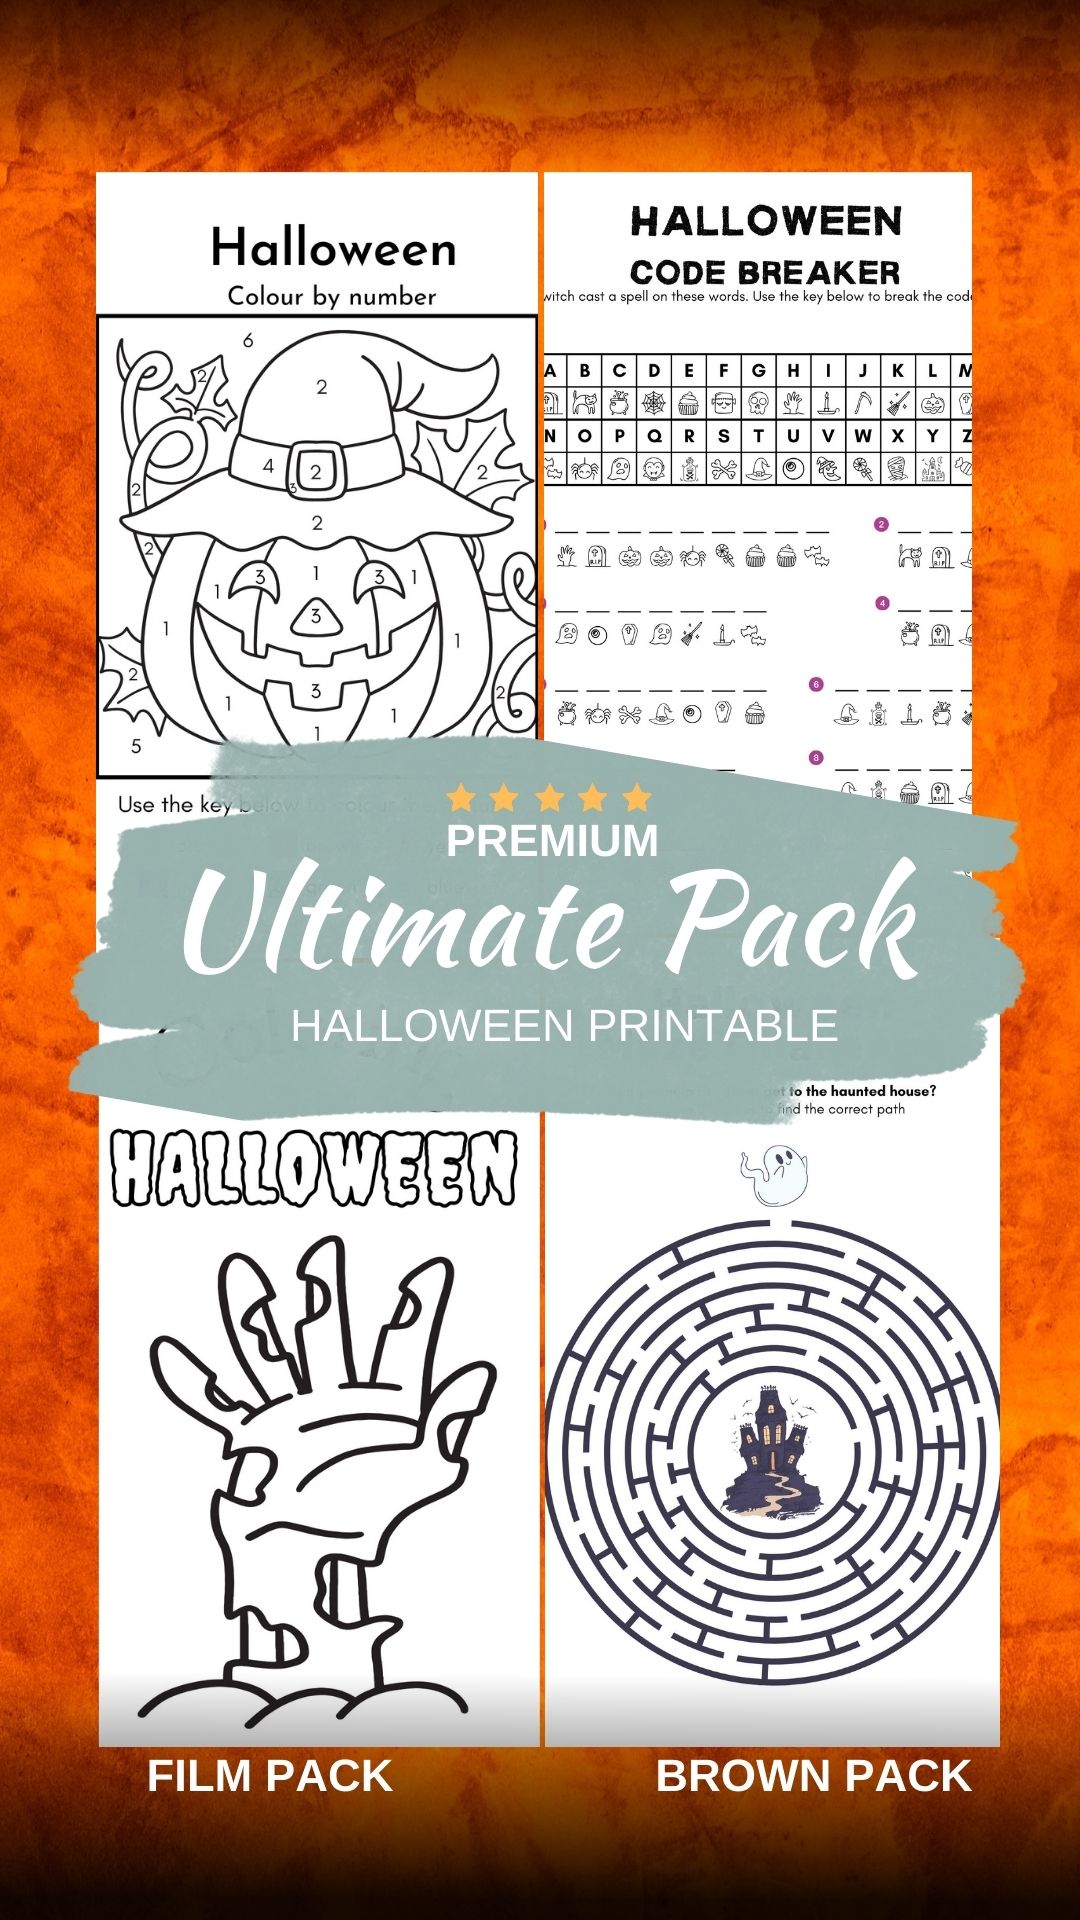 Halloween Printable Planners: Organizing Your Spooky Celebrations